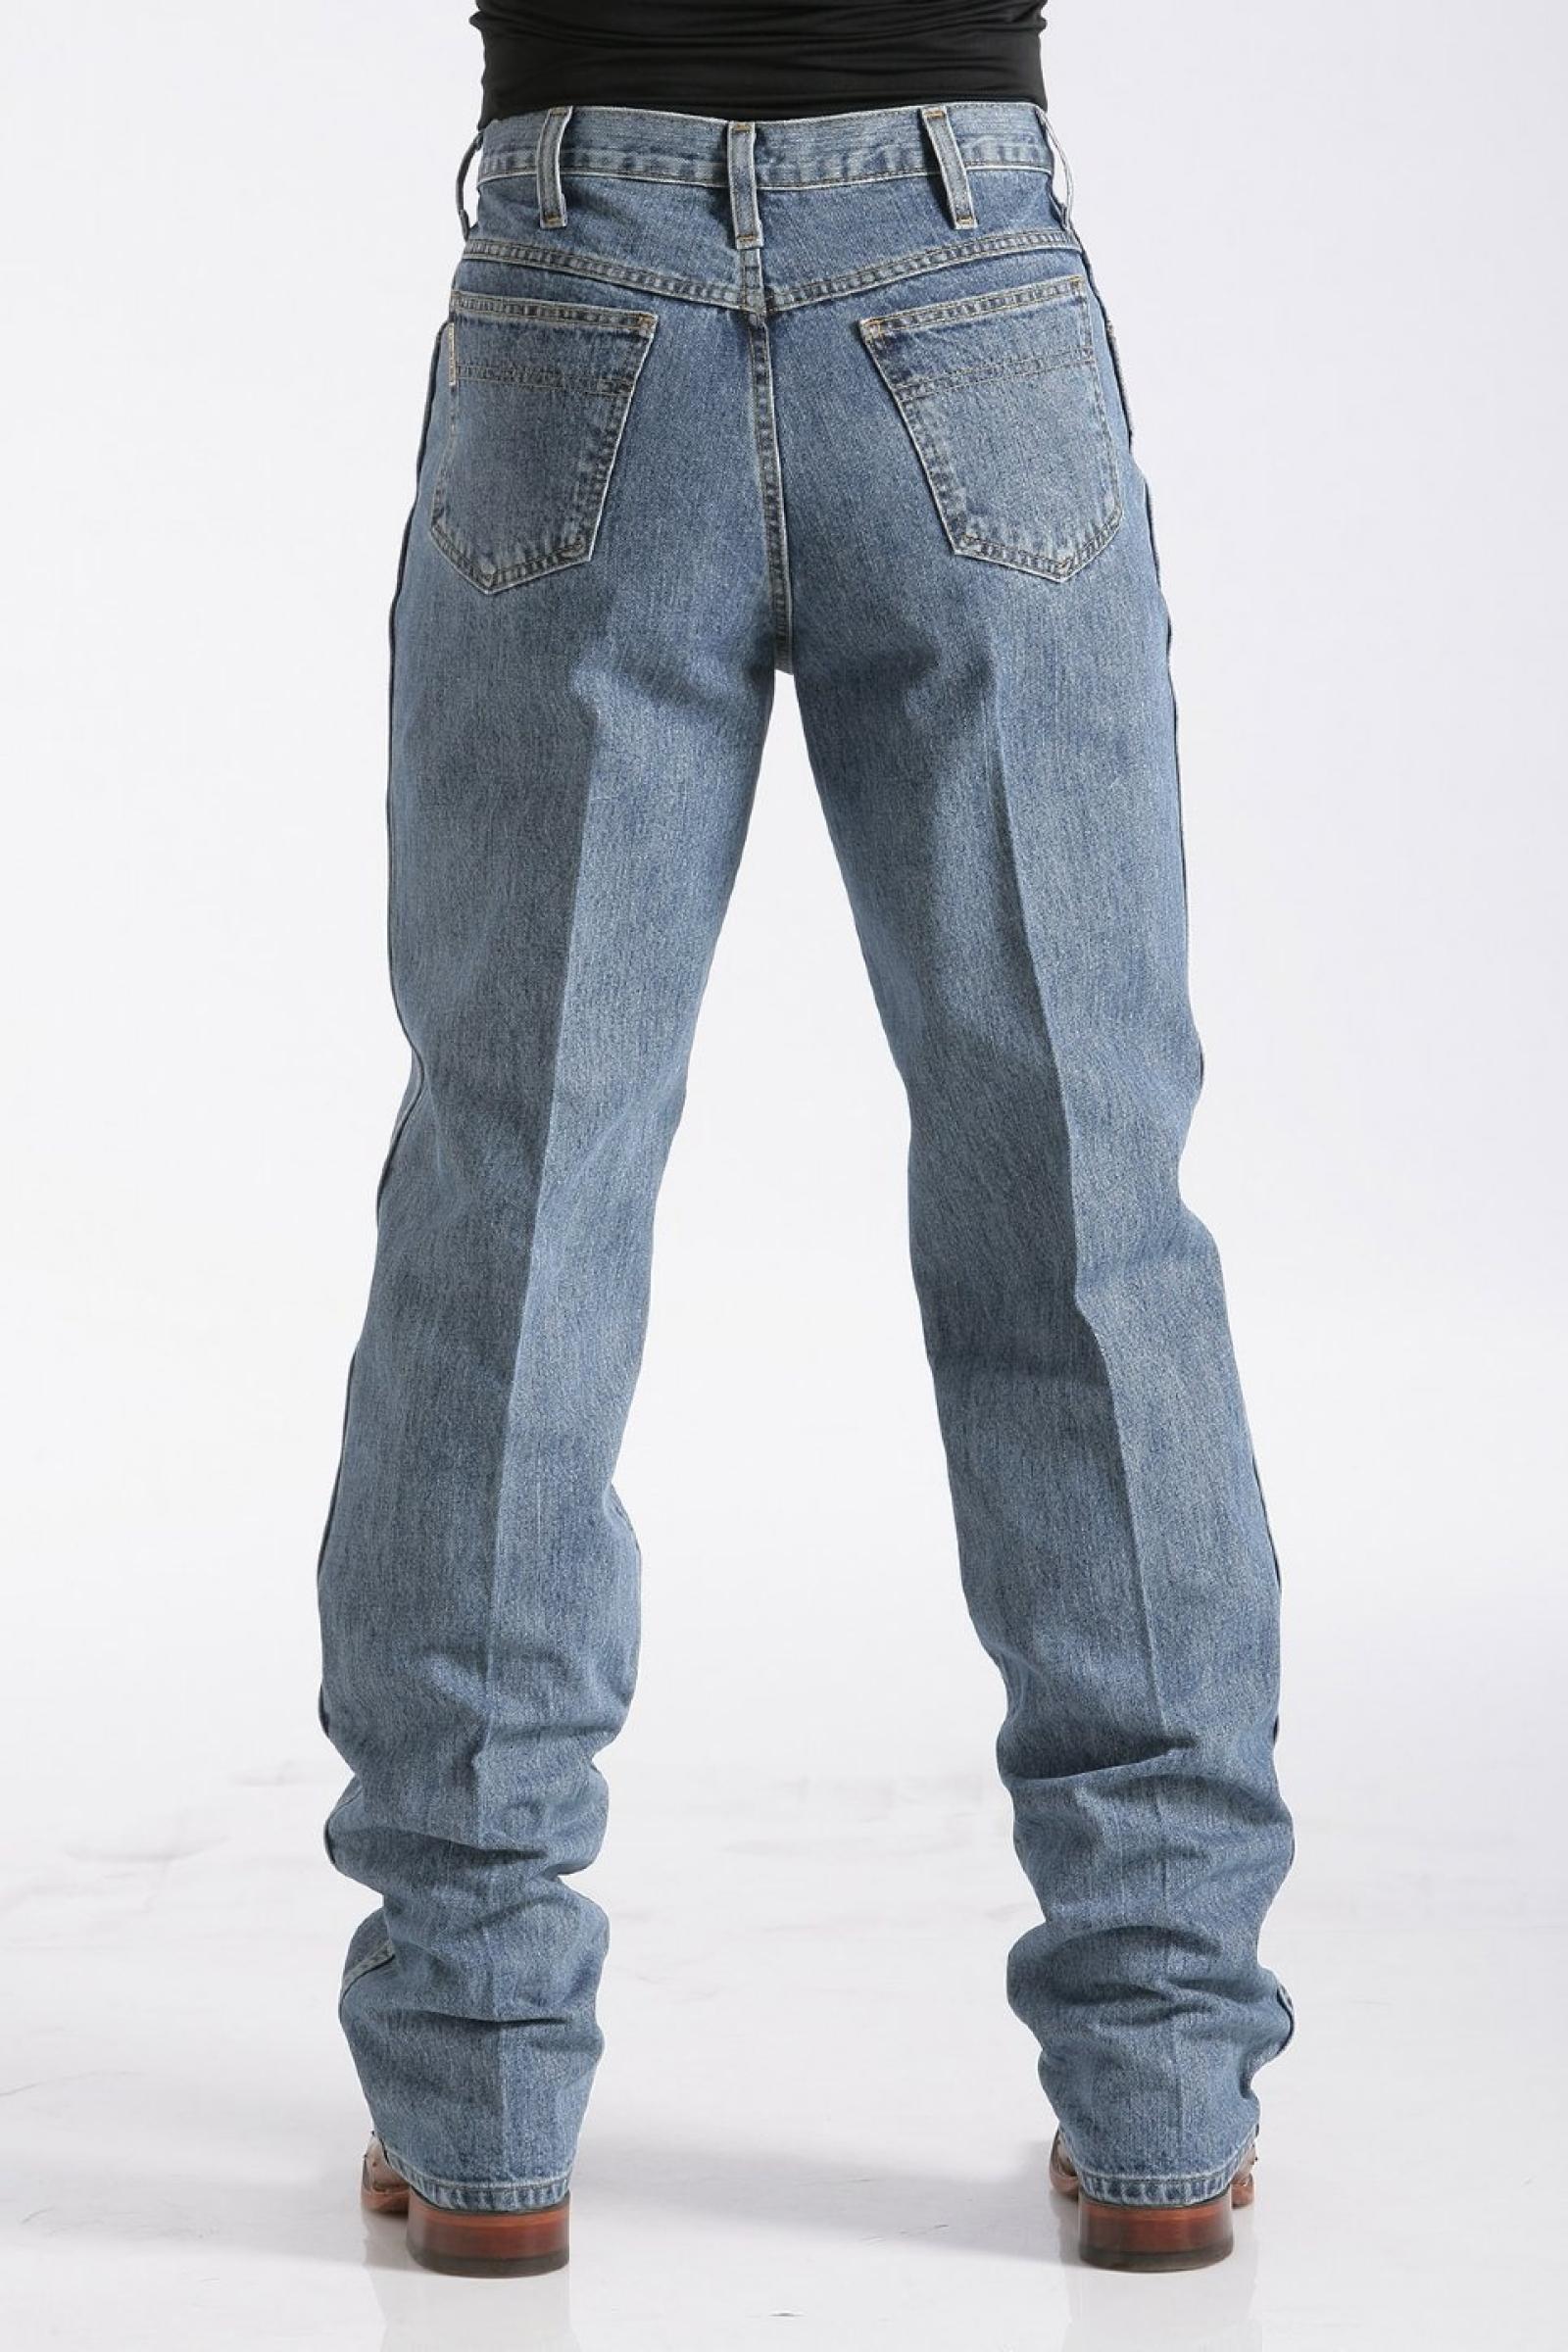 Cinch Men's Relaxed Fit Green Label Jeans